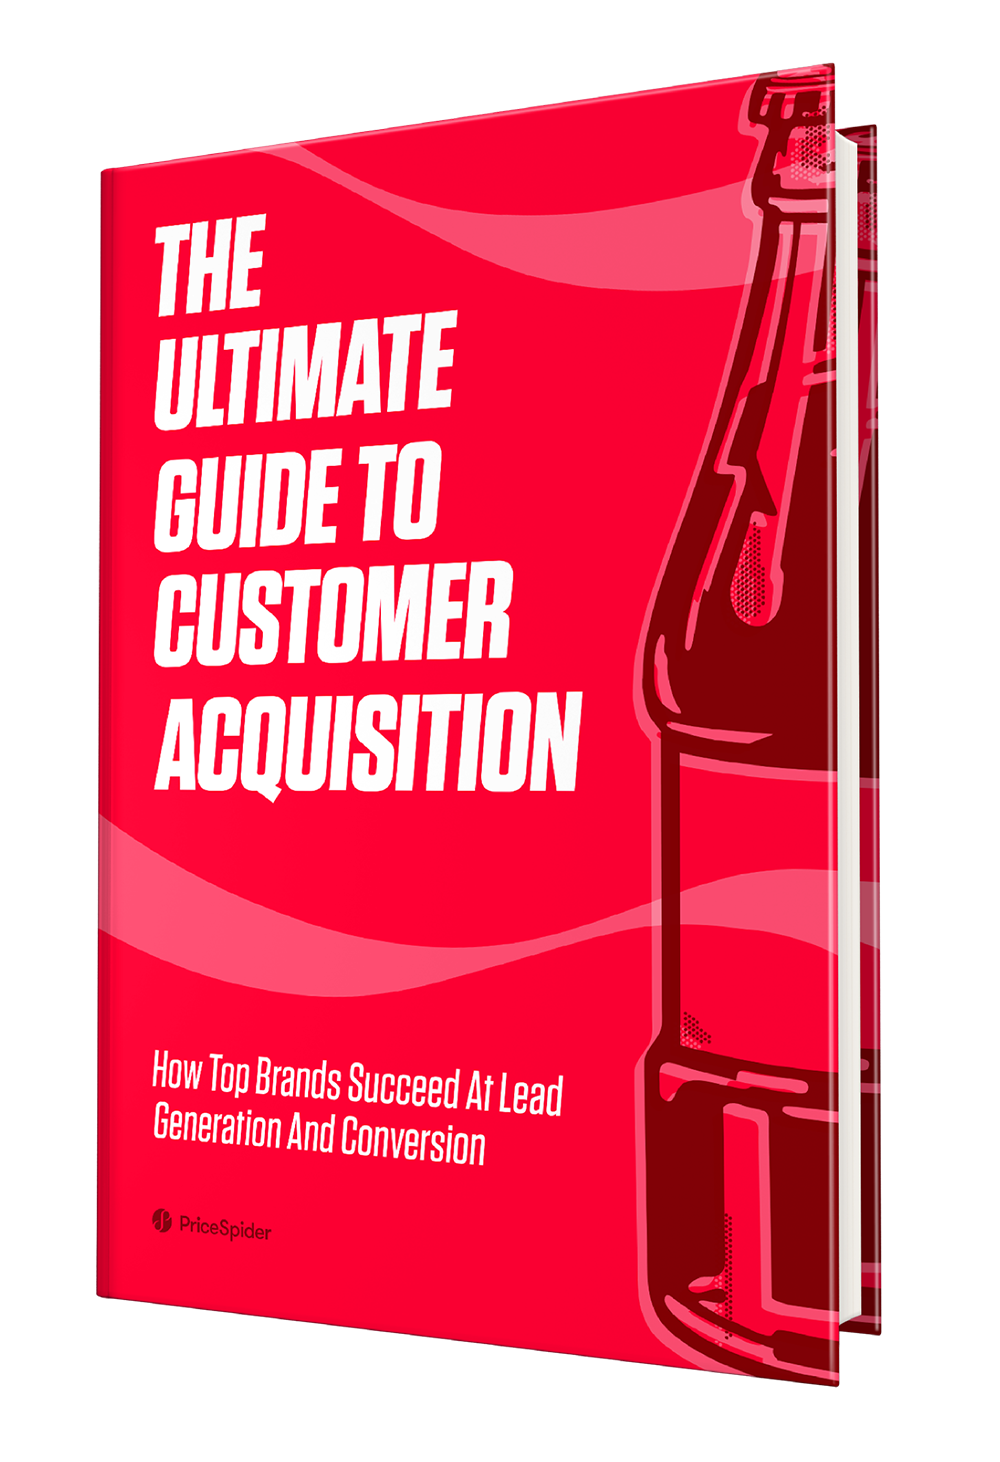 Ebook-Guide to Customer Acquisition_HERO-IMG